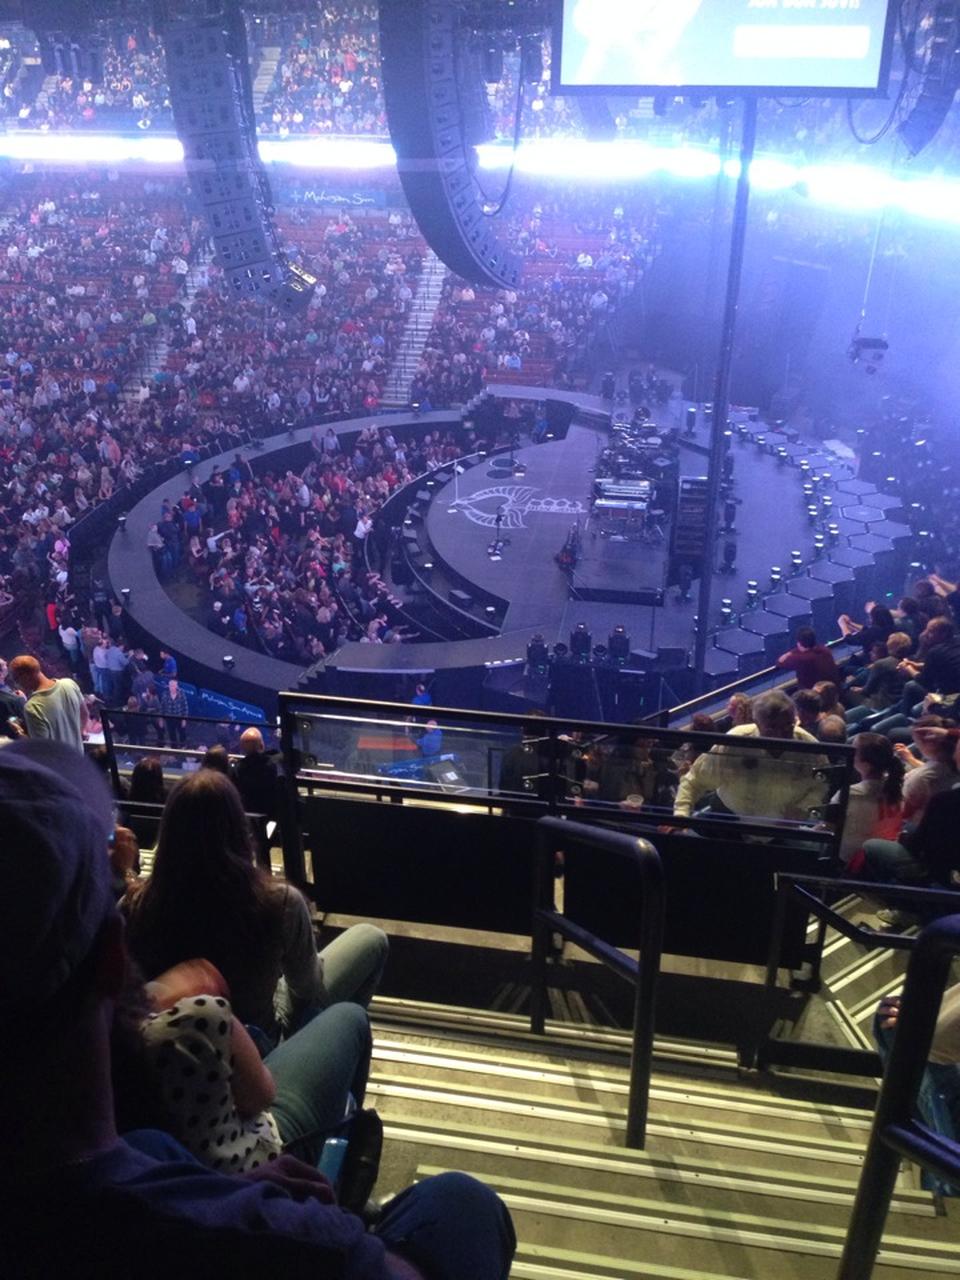 section 105, row k seat view  for concert - mohegan sun arena